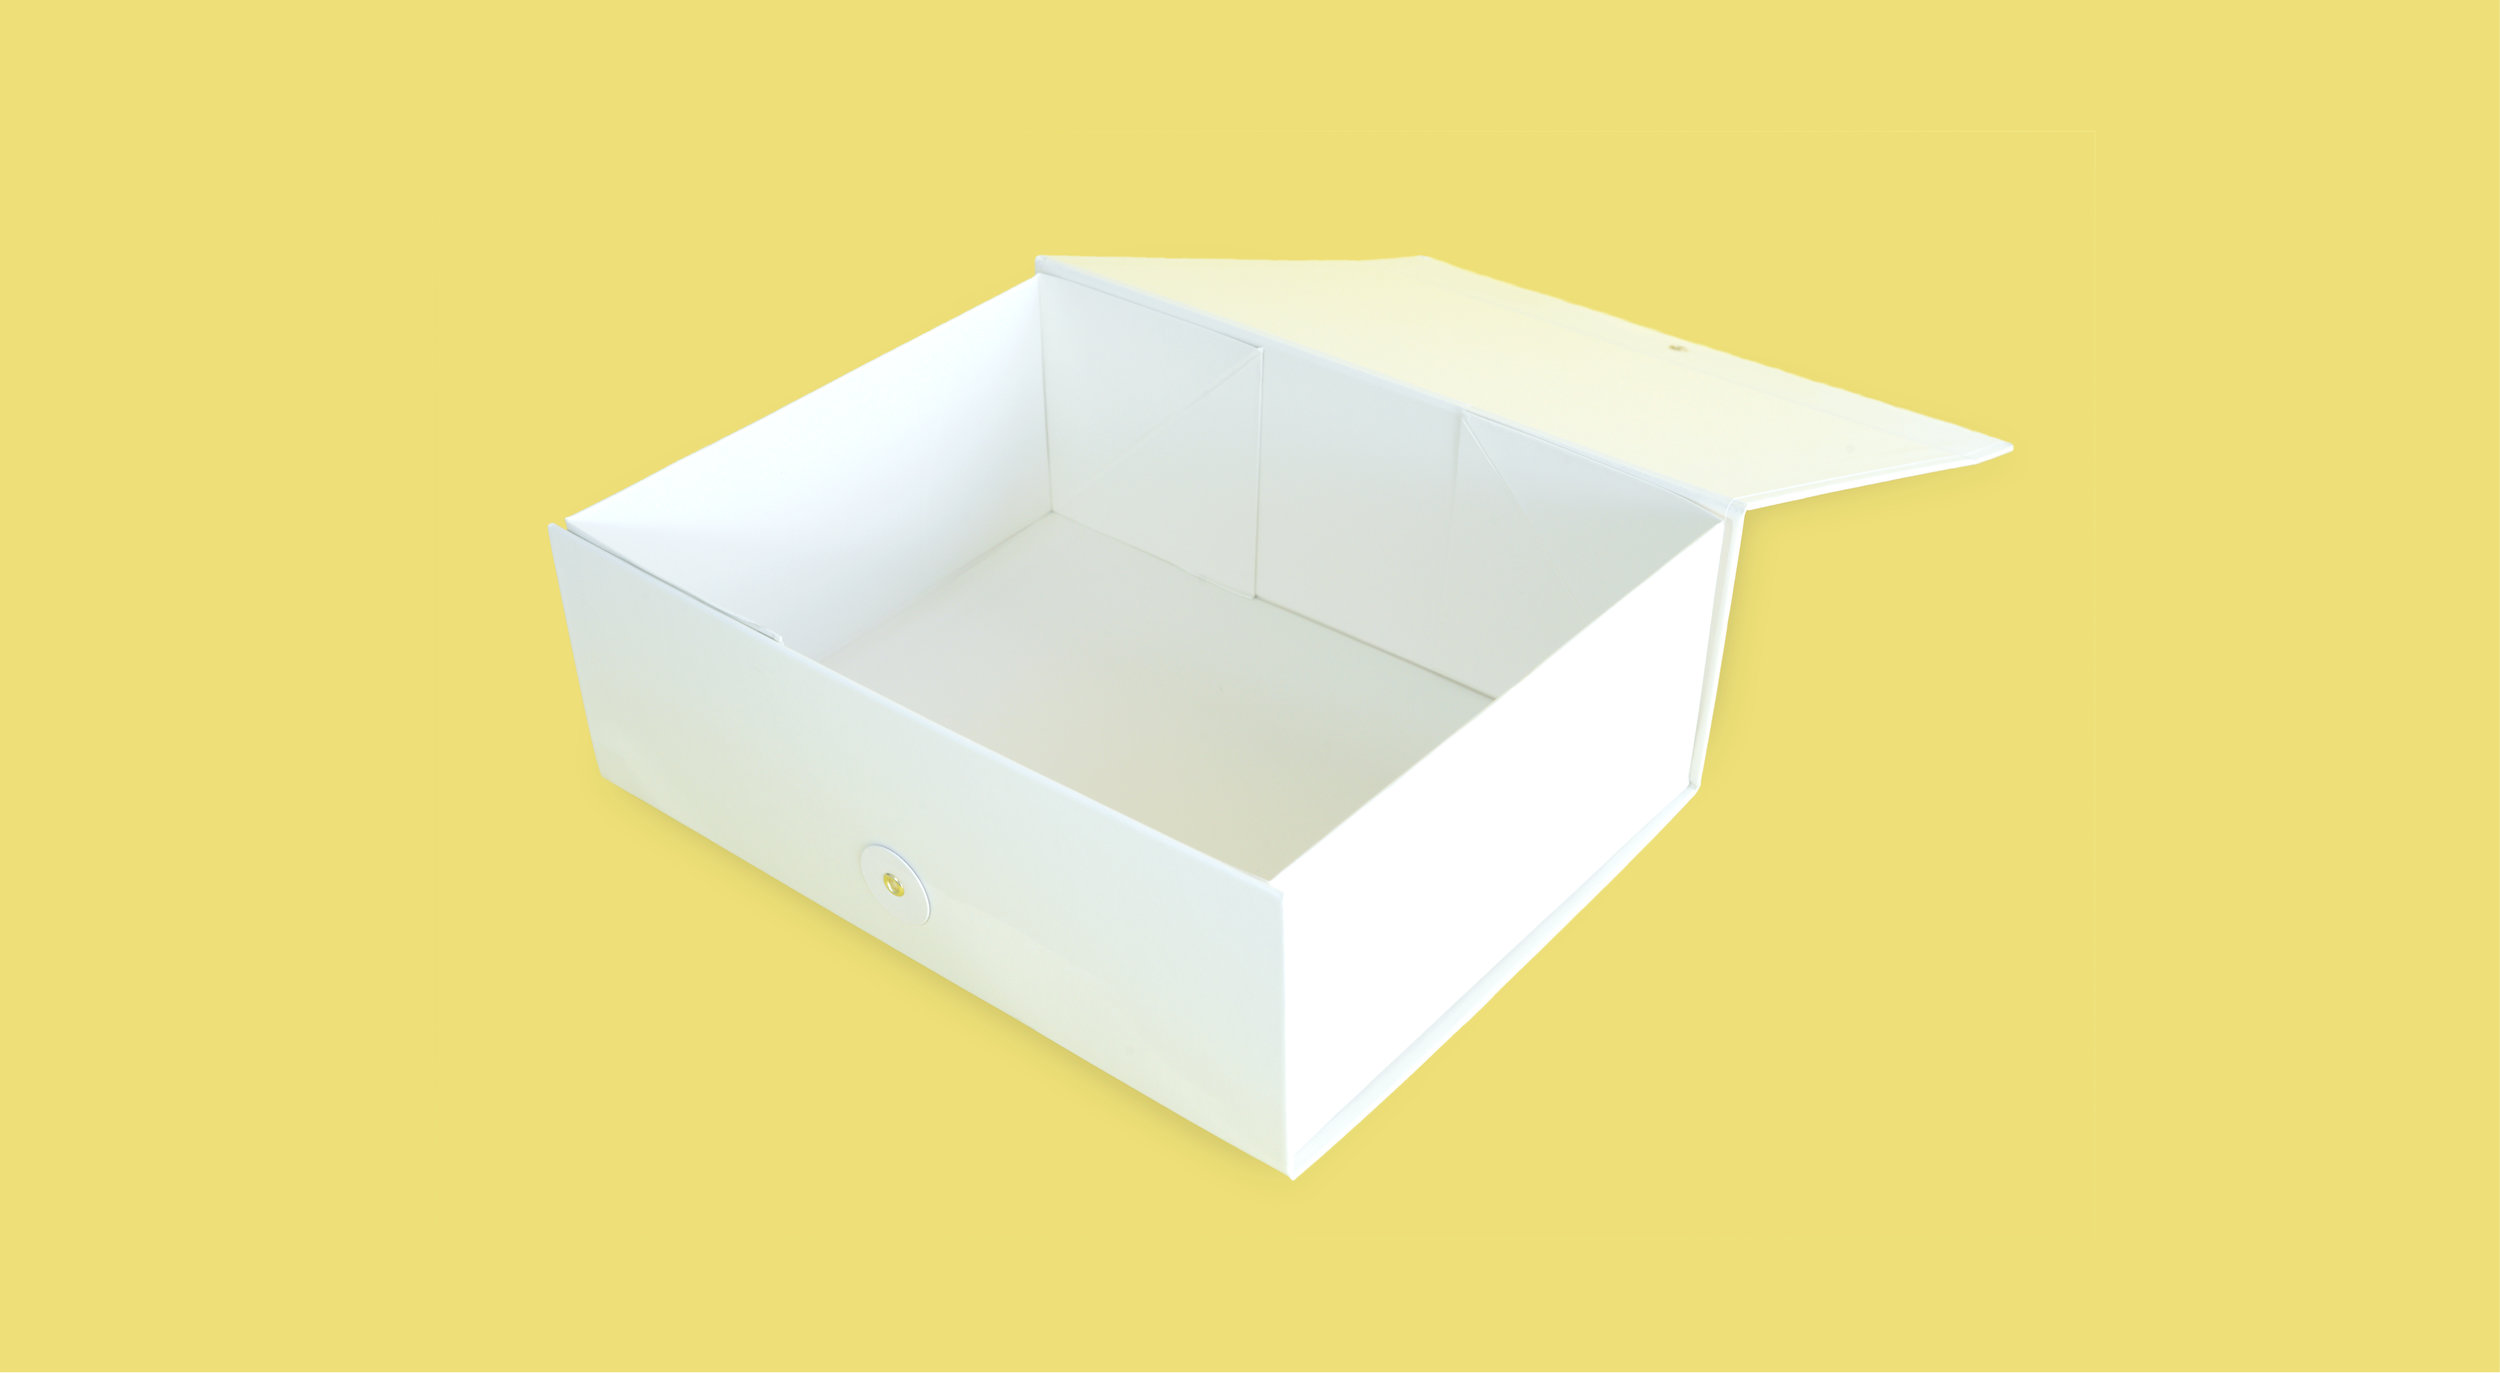 Collapsible rigid box constructed 